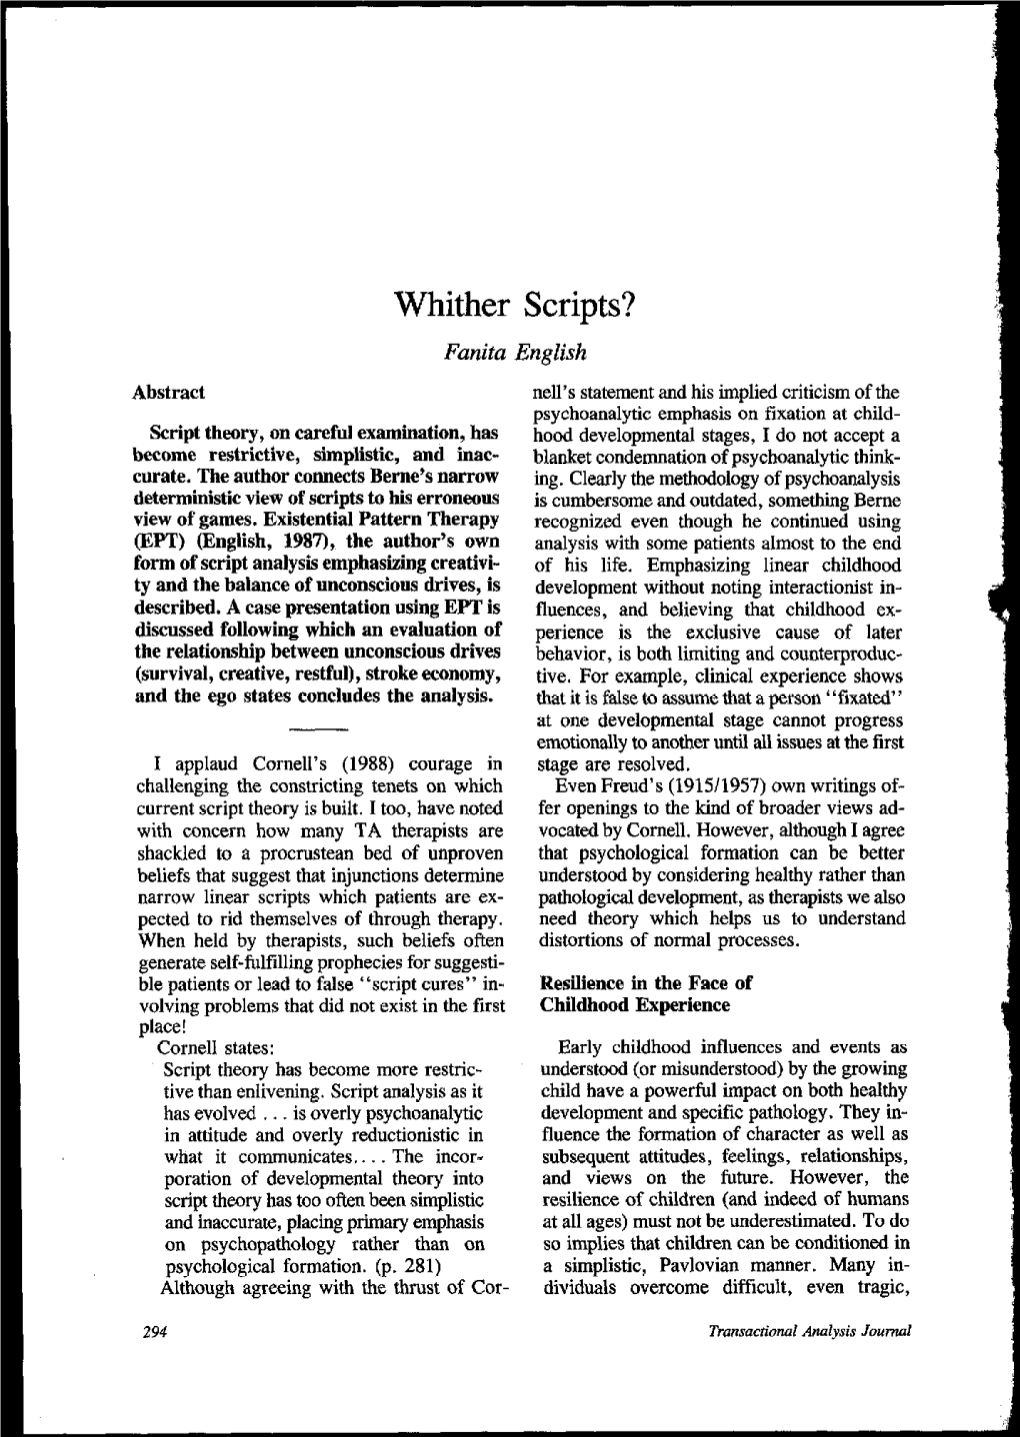 1988: Whither Scripts?